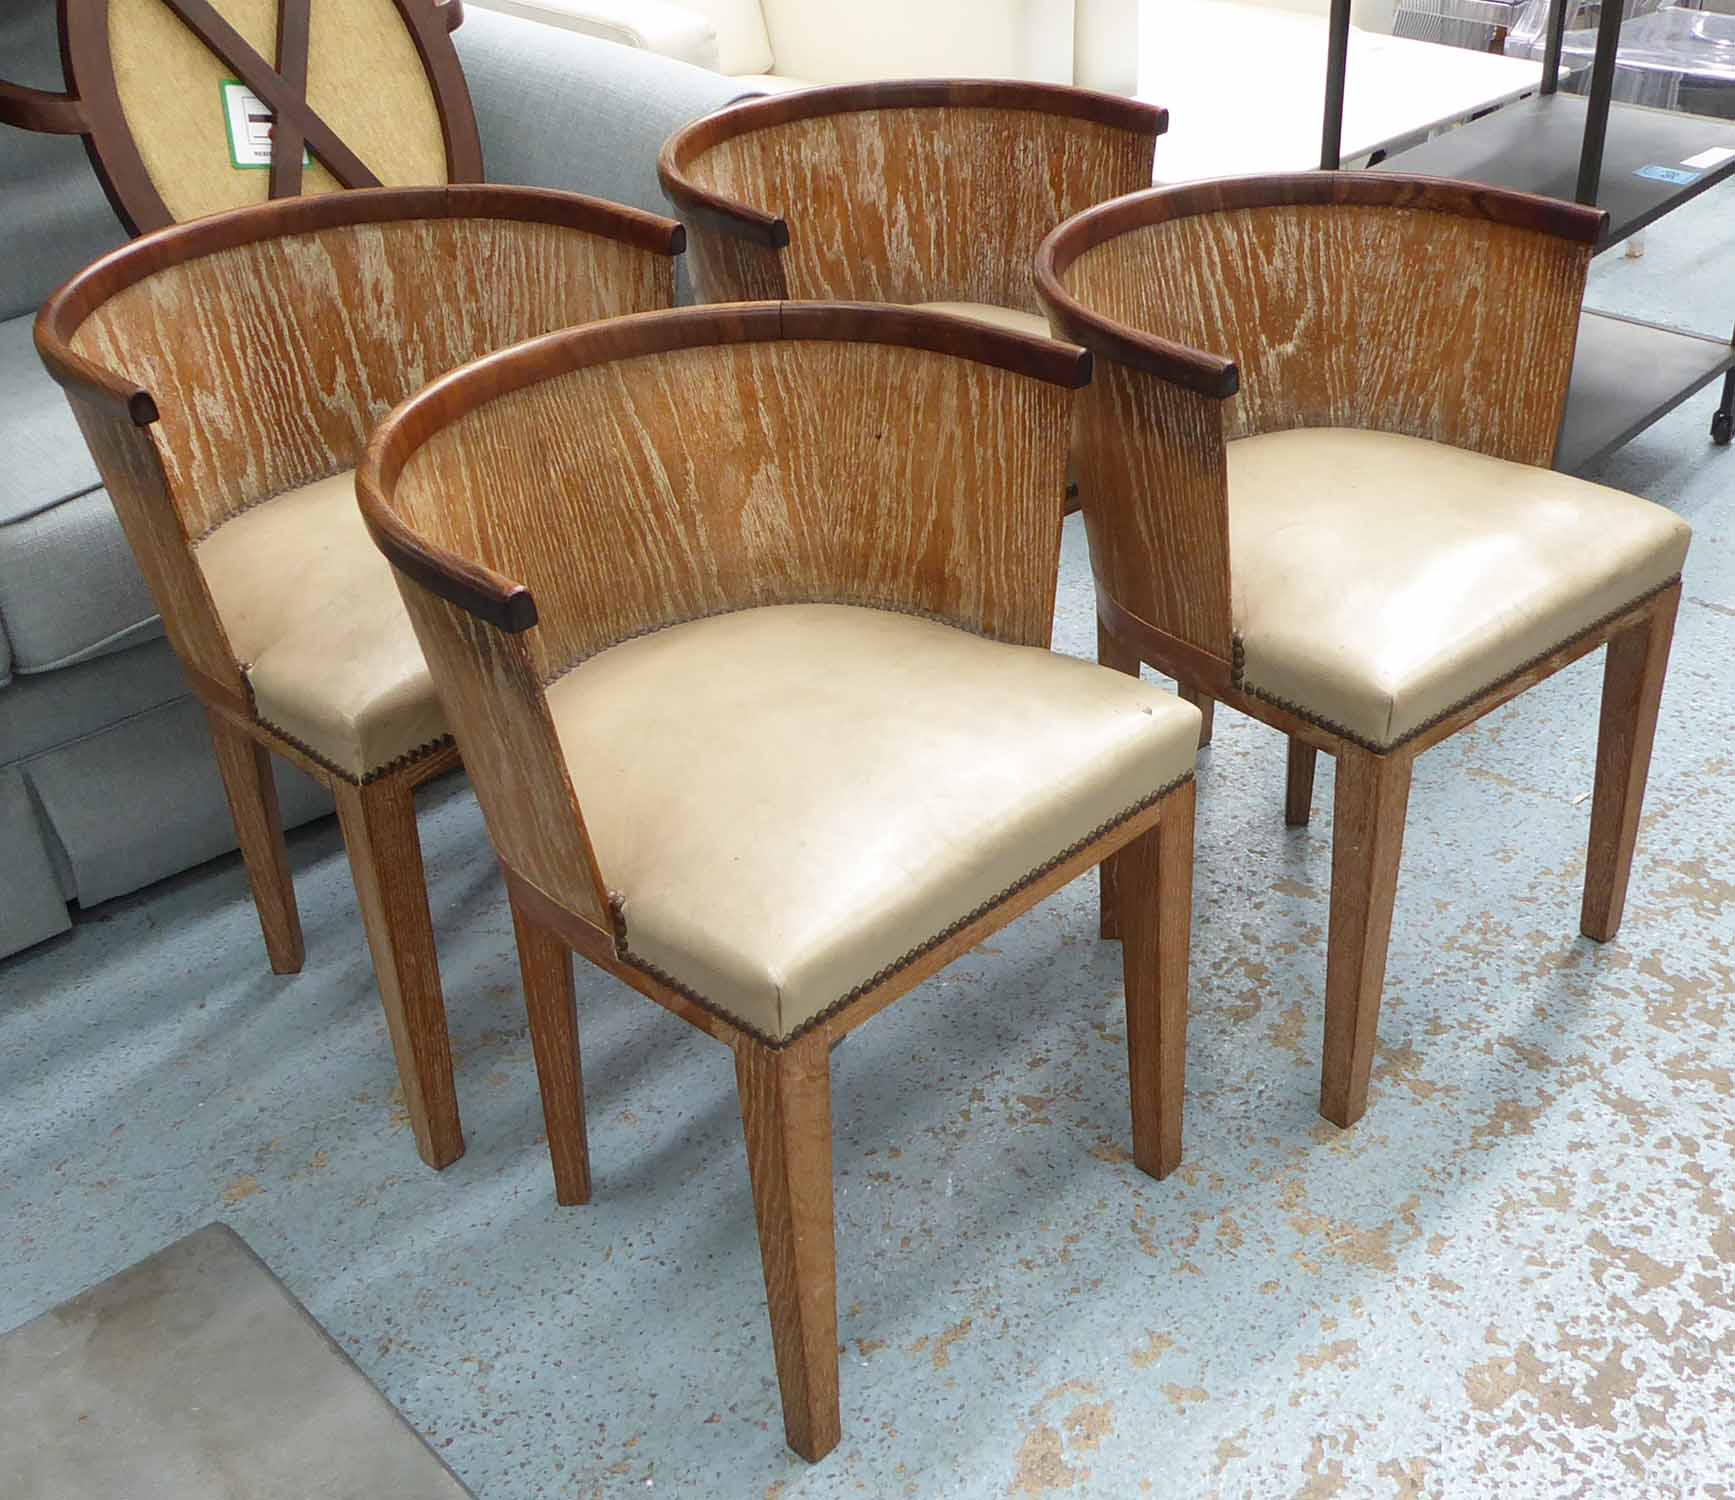 ATTRIBUTED TO ATELIER MAJORELLE BARREL CHAIRS, a set of four, circa 1930's, French Art Deco,